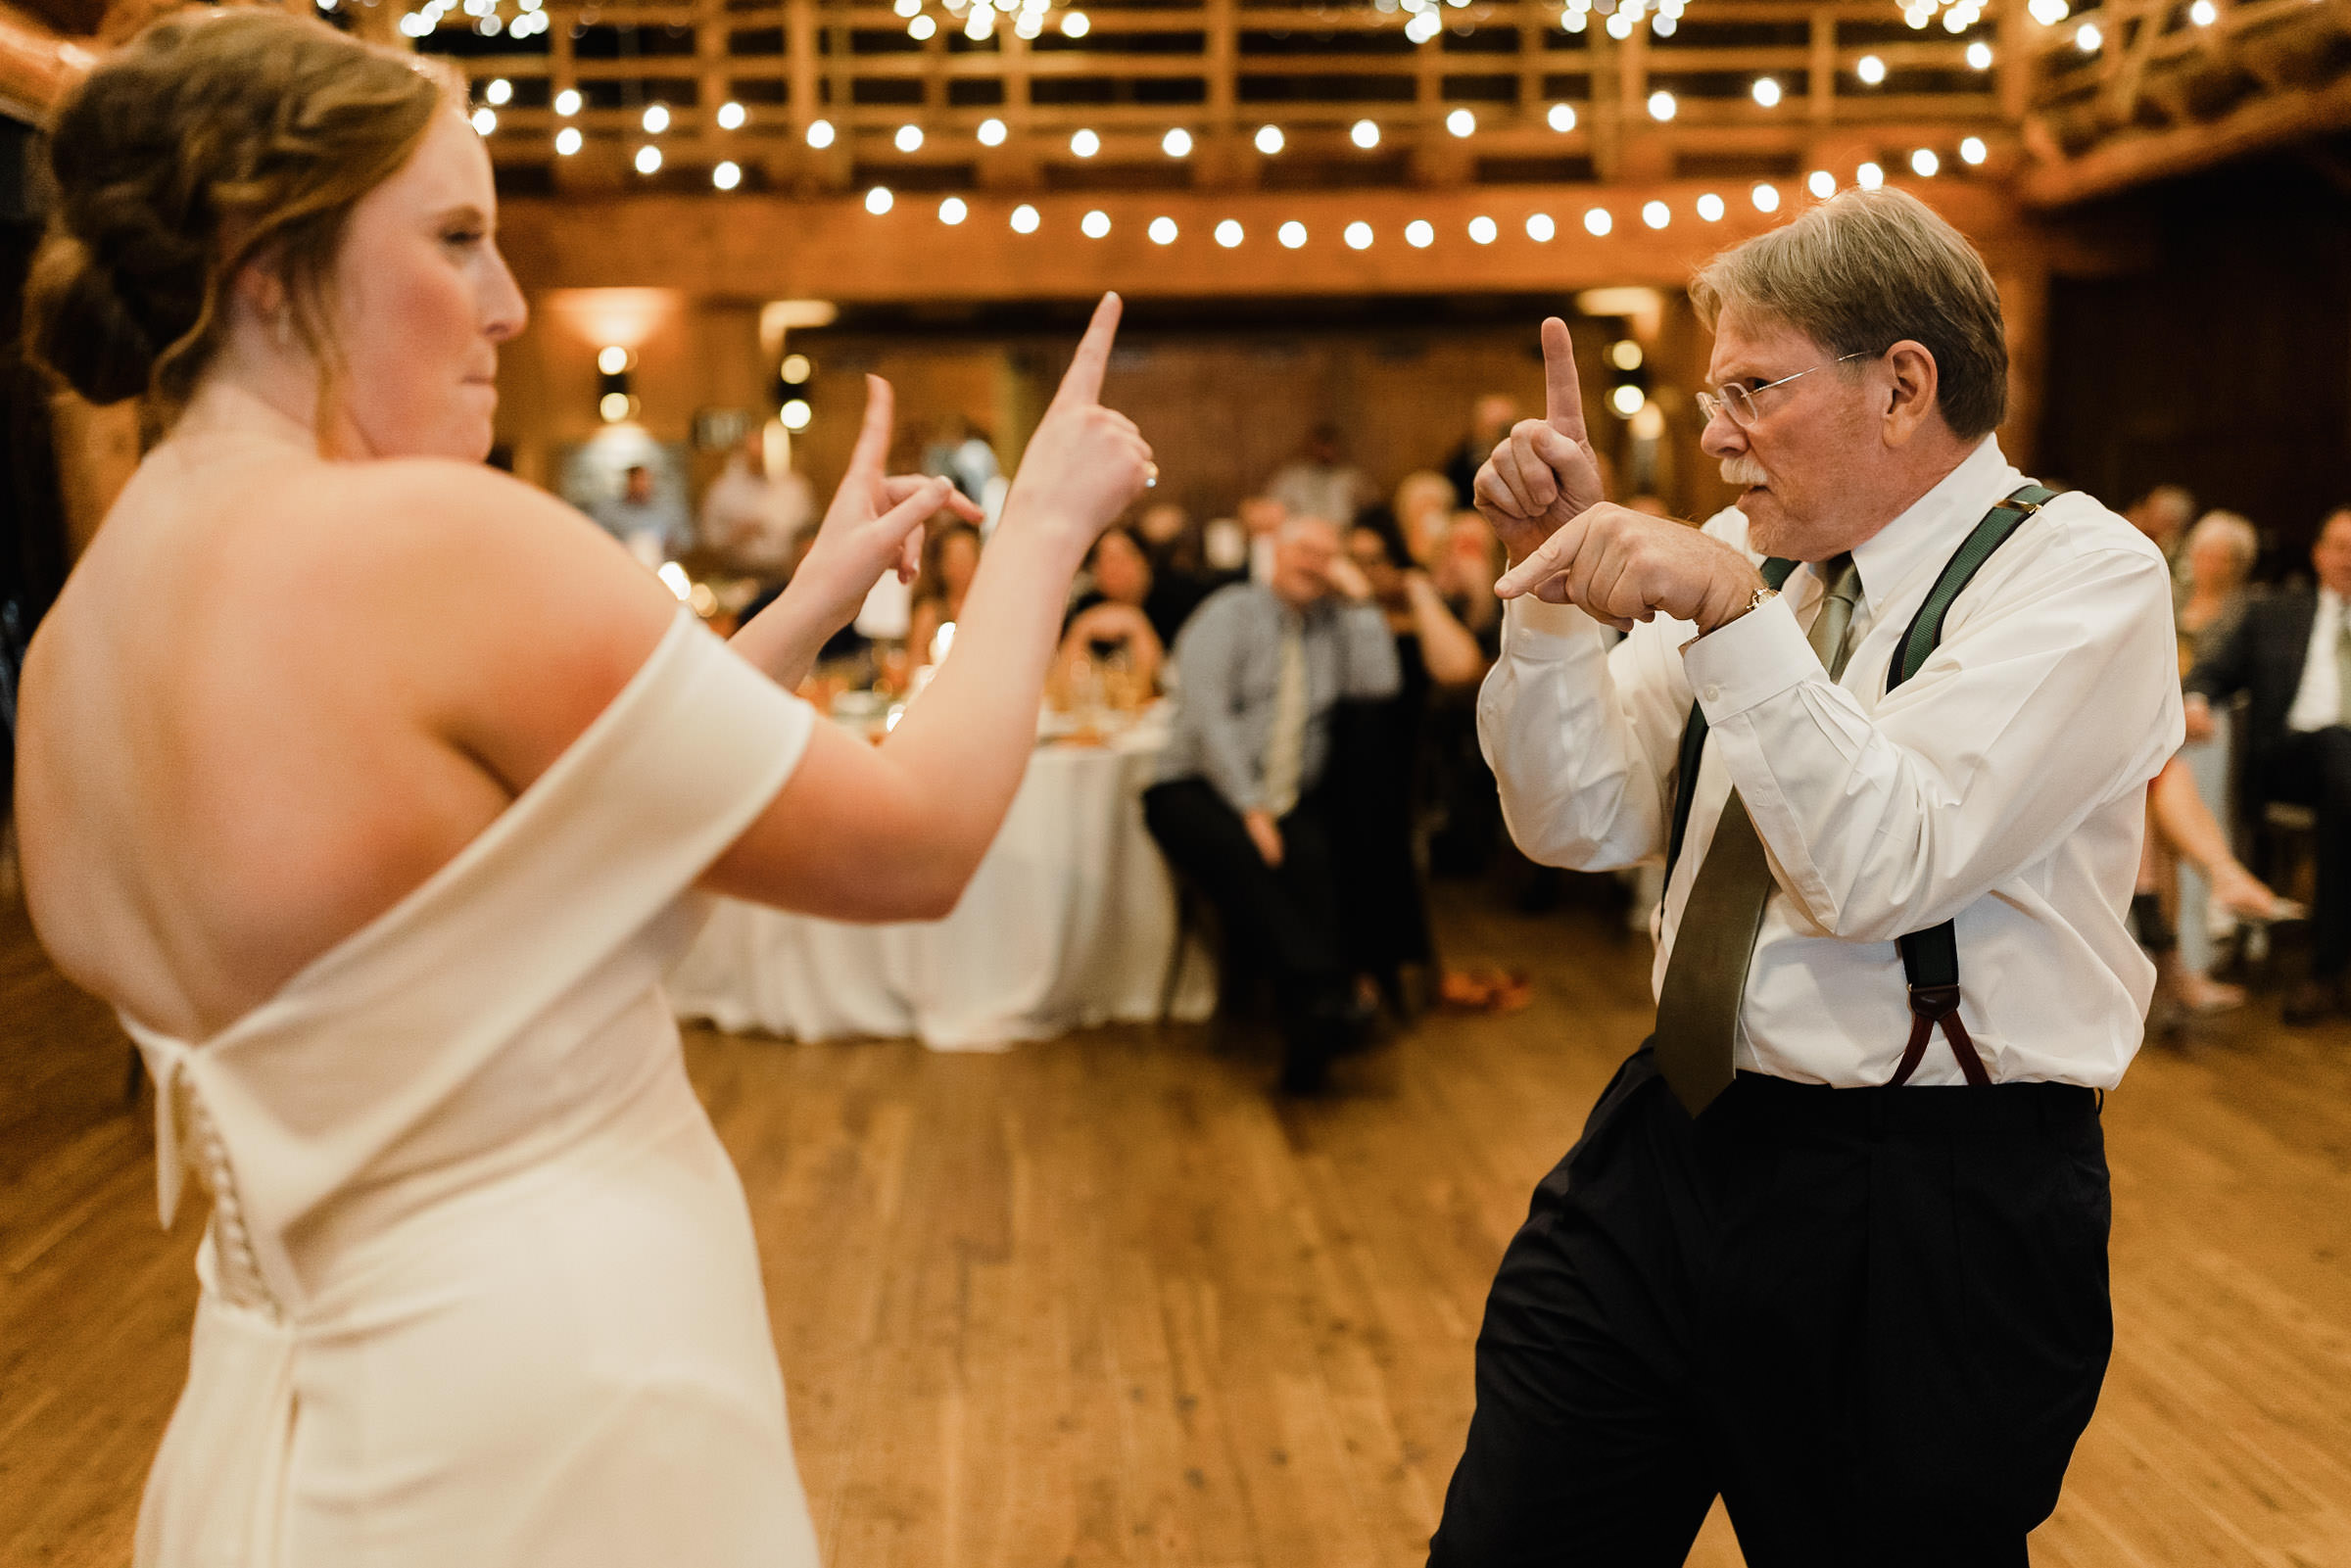 Bride and her dad dance together